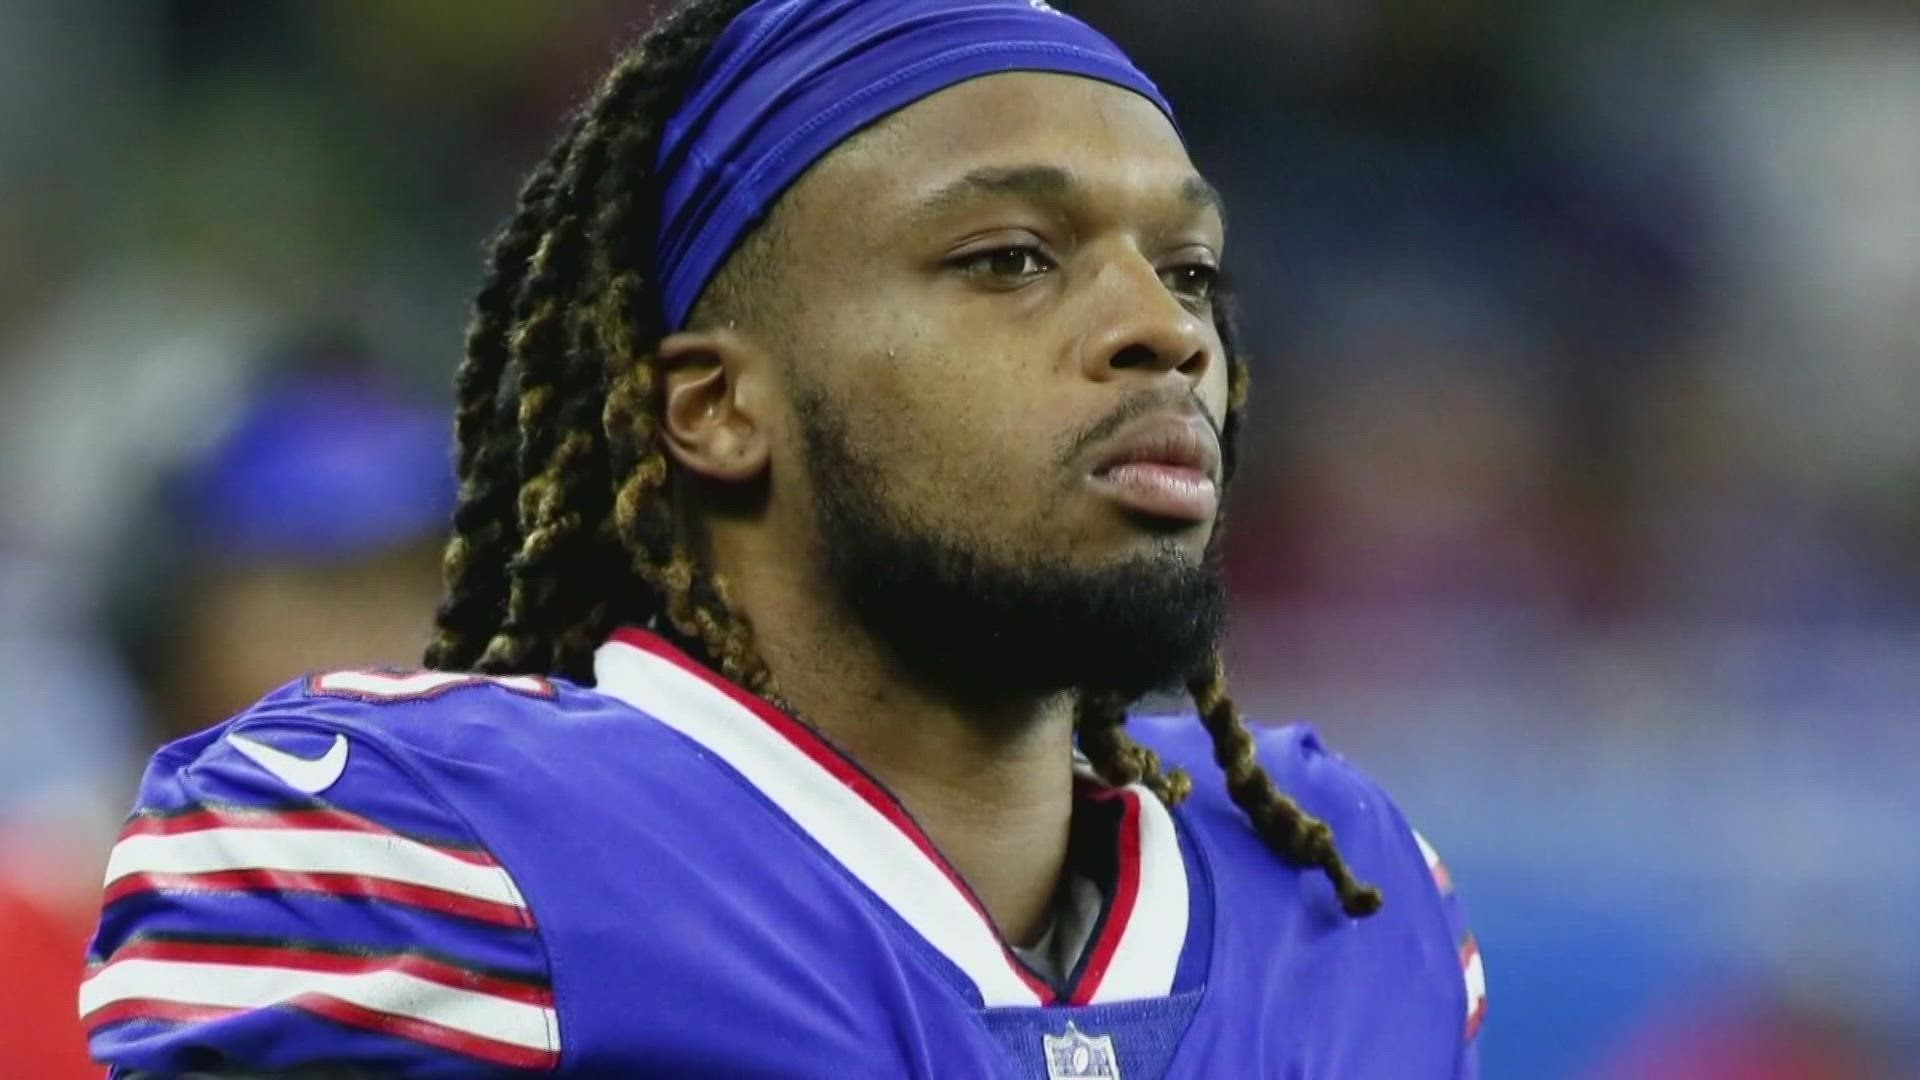 There's been an increased interest in the life-saving technique after a Buffalo Bills player suffered cardiac arrest during a game on Monday night.